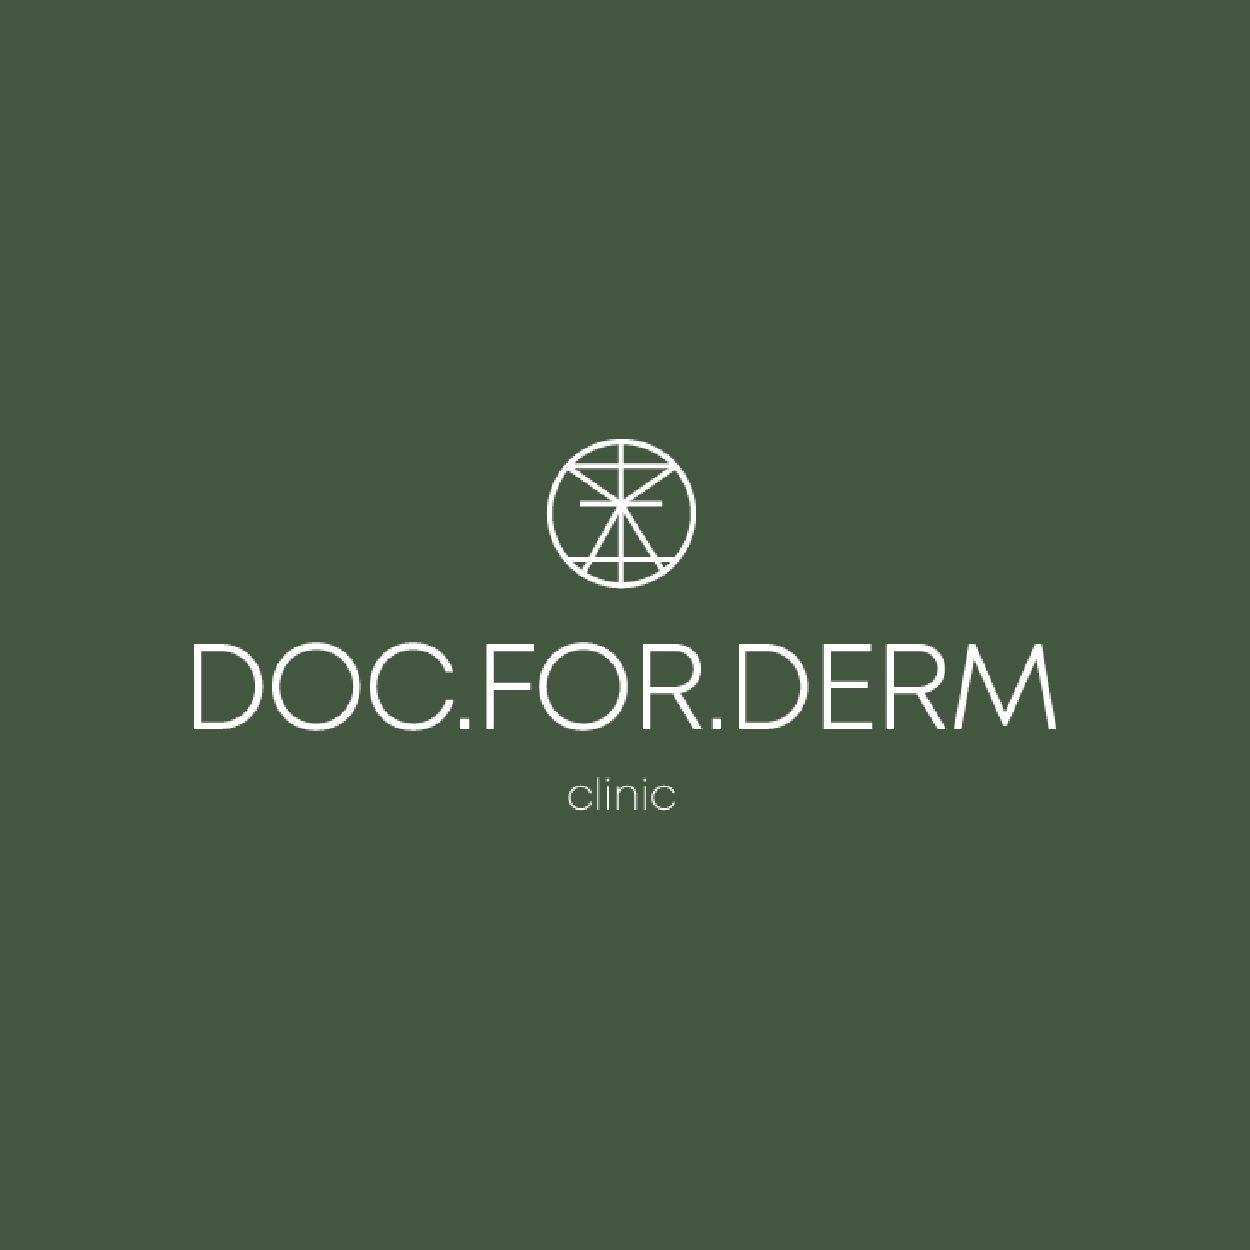 DOC.FOR.DERM clinic